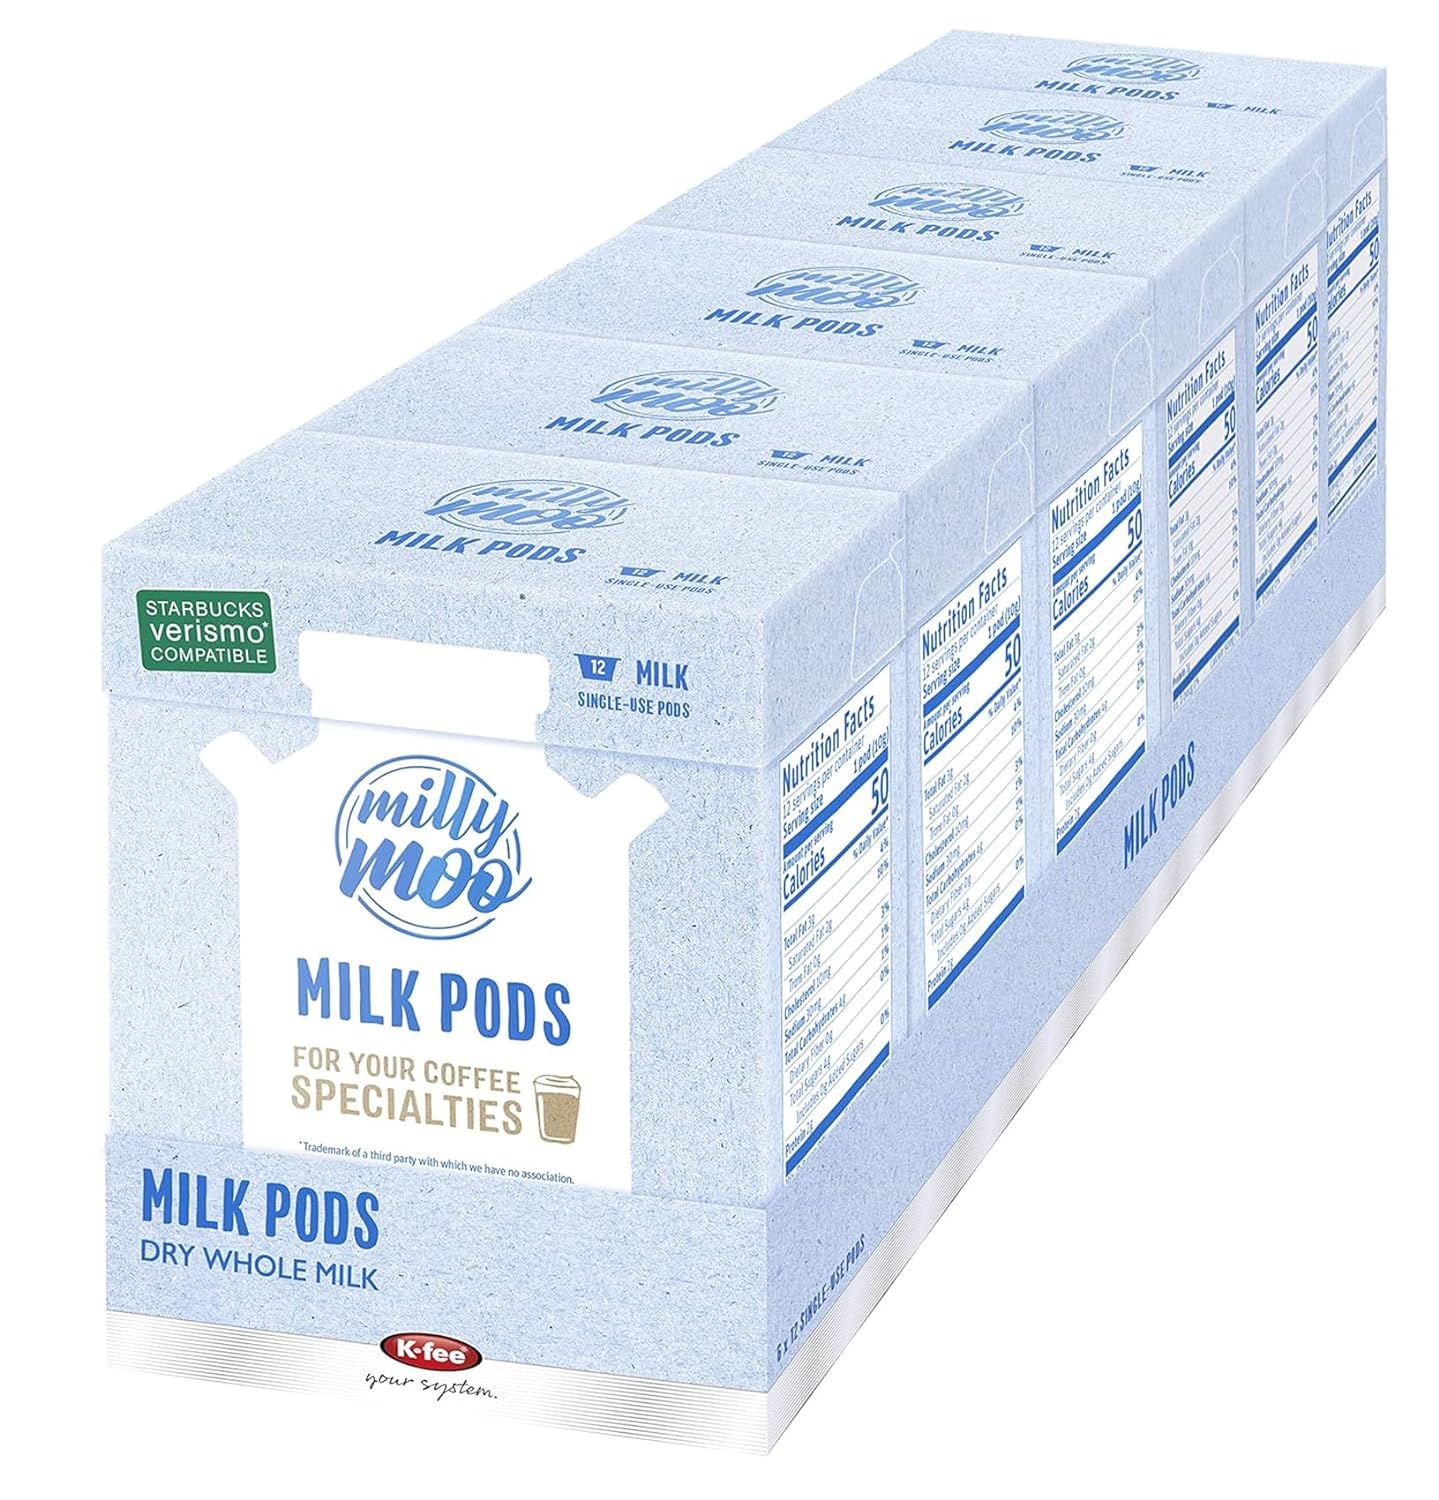 Milly Moo Milk Capsules for Your Coffee Specialties, Compatible with K-fee Capsule Machines, 100% Full Milk Powder, 6 x 12 Capsules (72 Capsules)